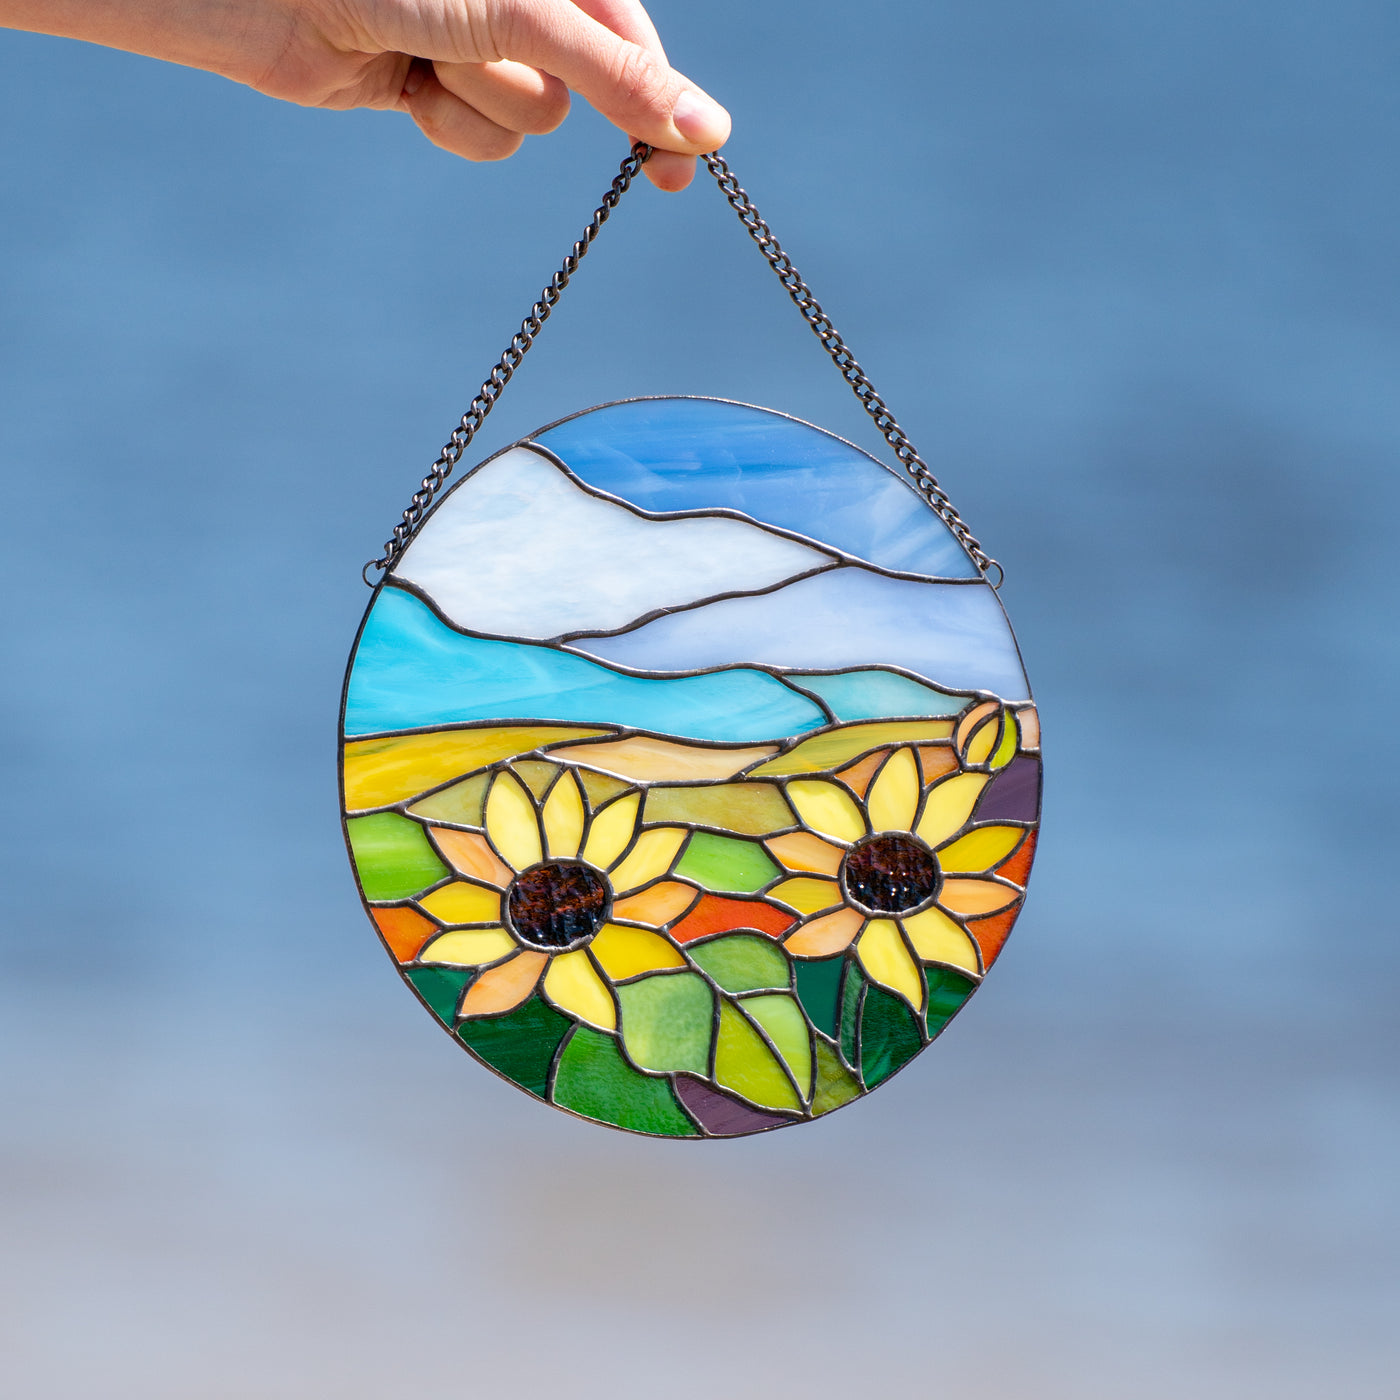 Round panel depicting sunflowers and sky of stained glass